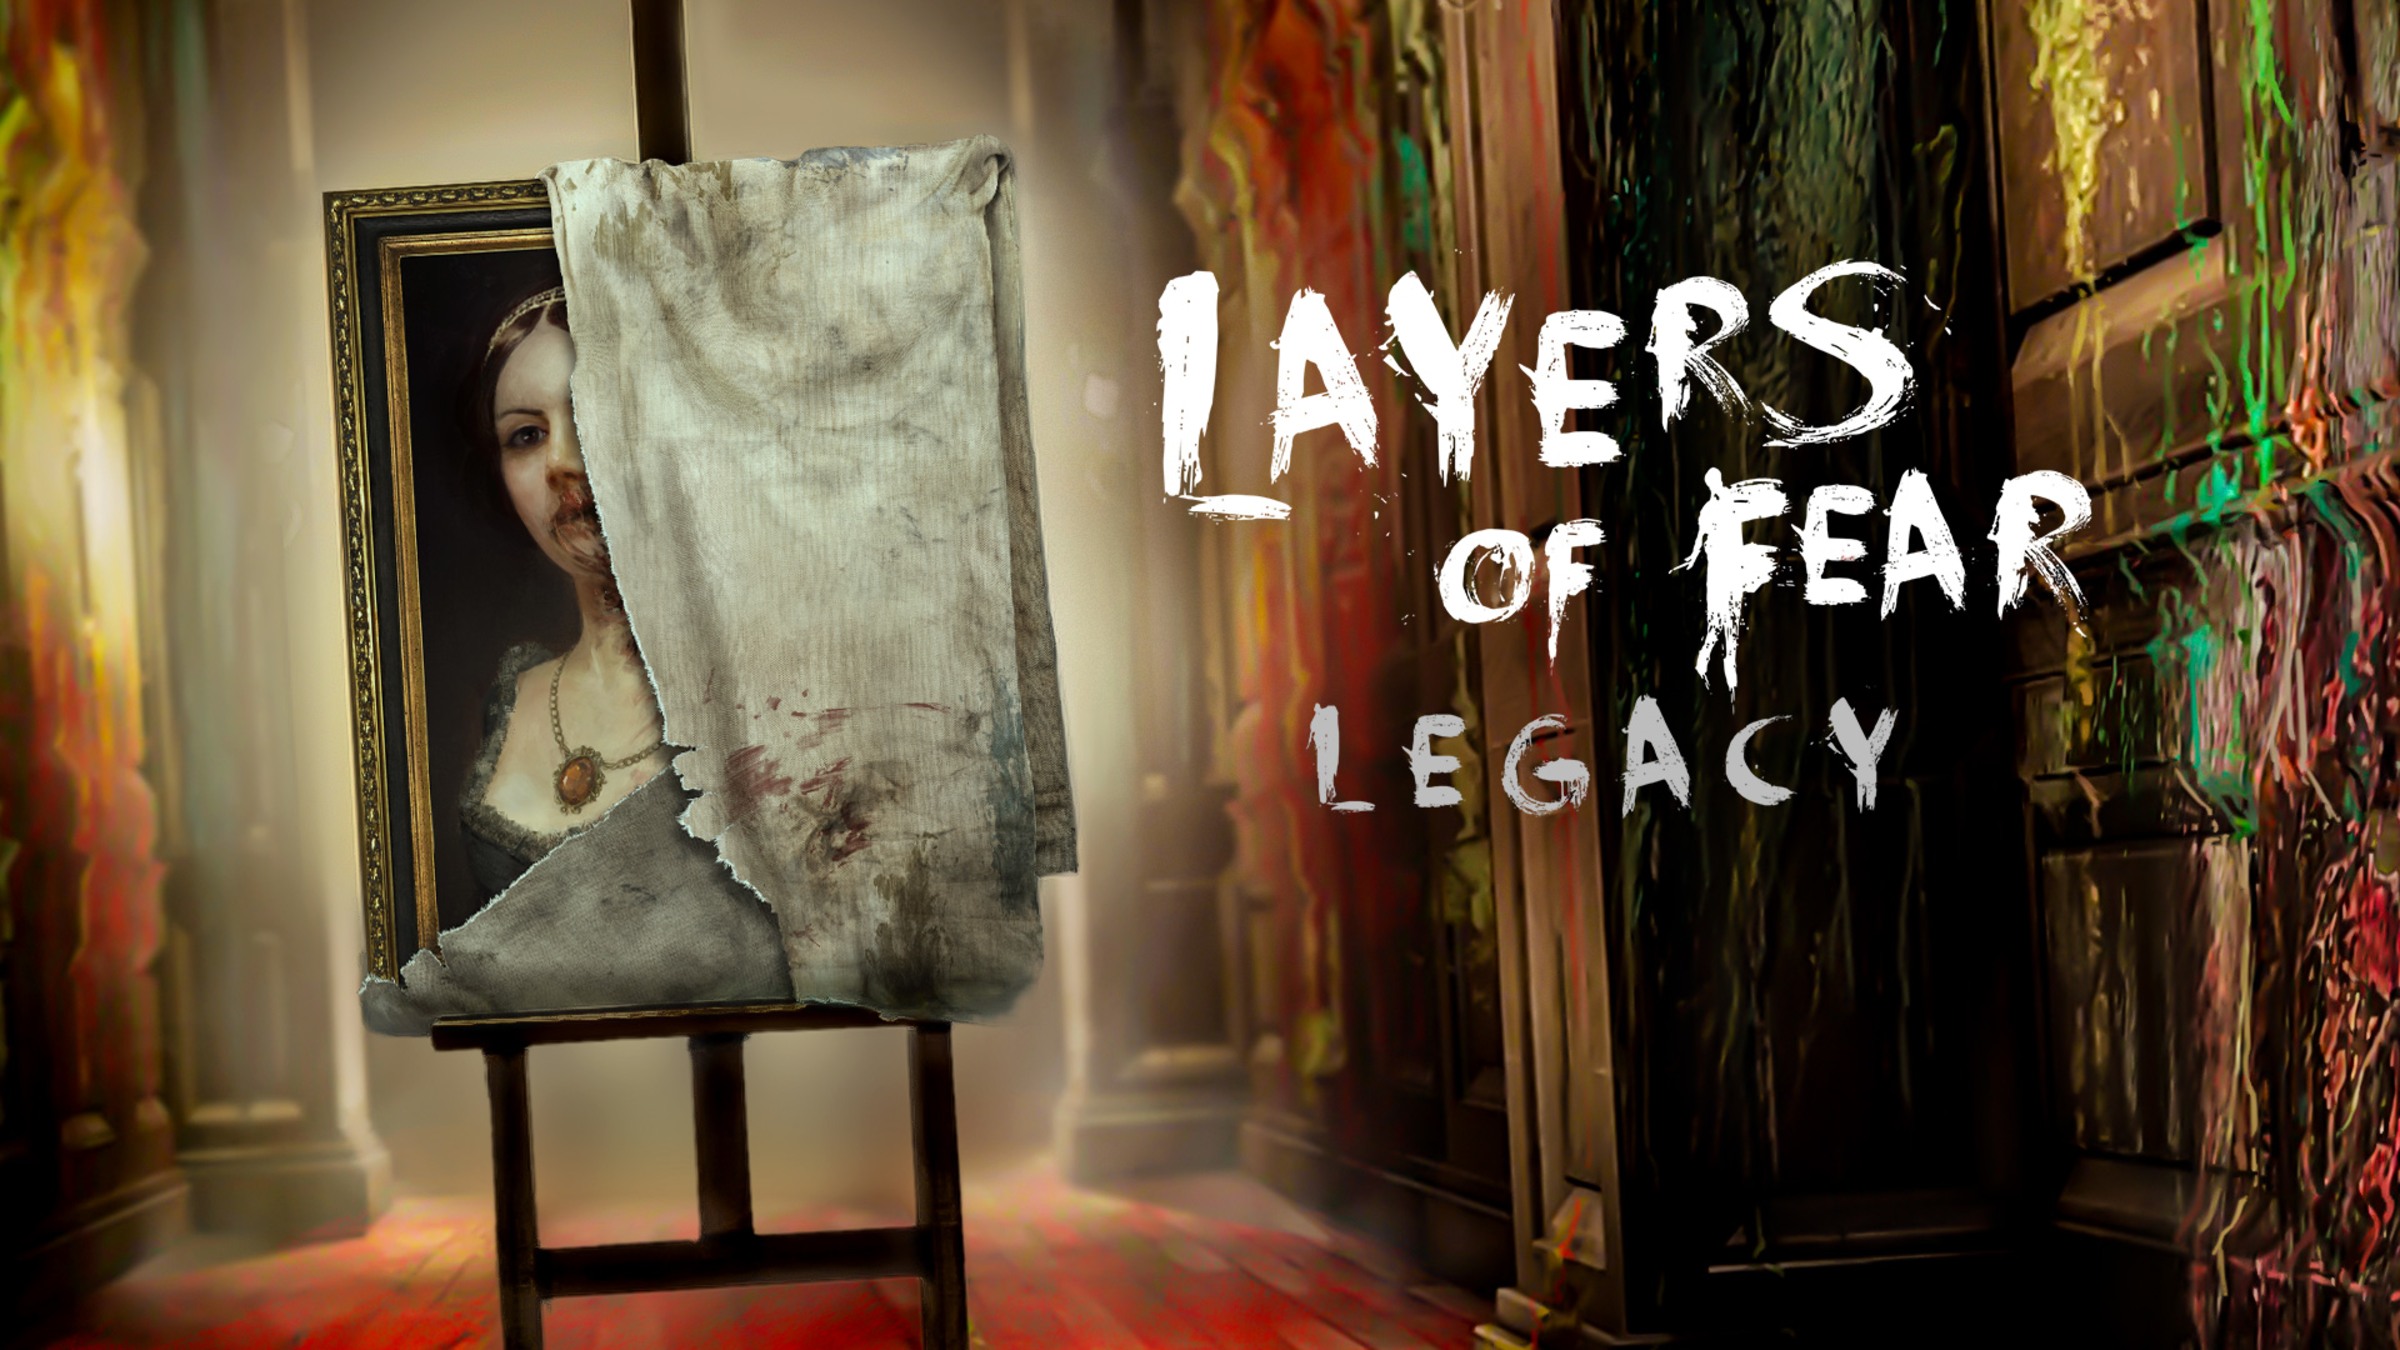 Layers of Fear: Legacy - Nintendo Switch